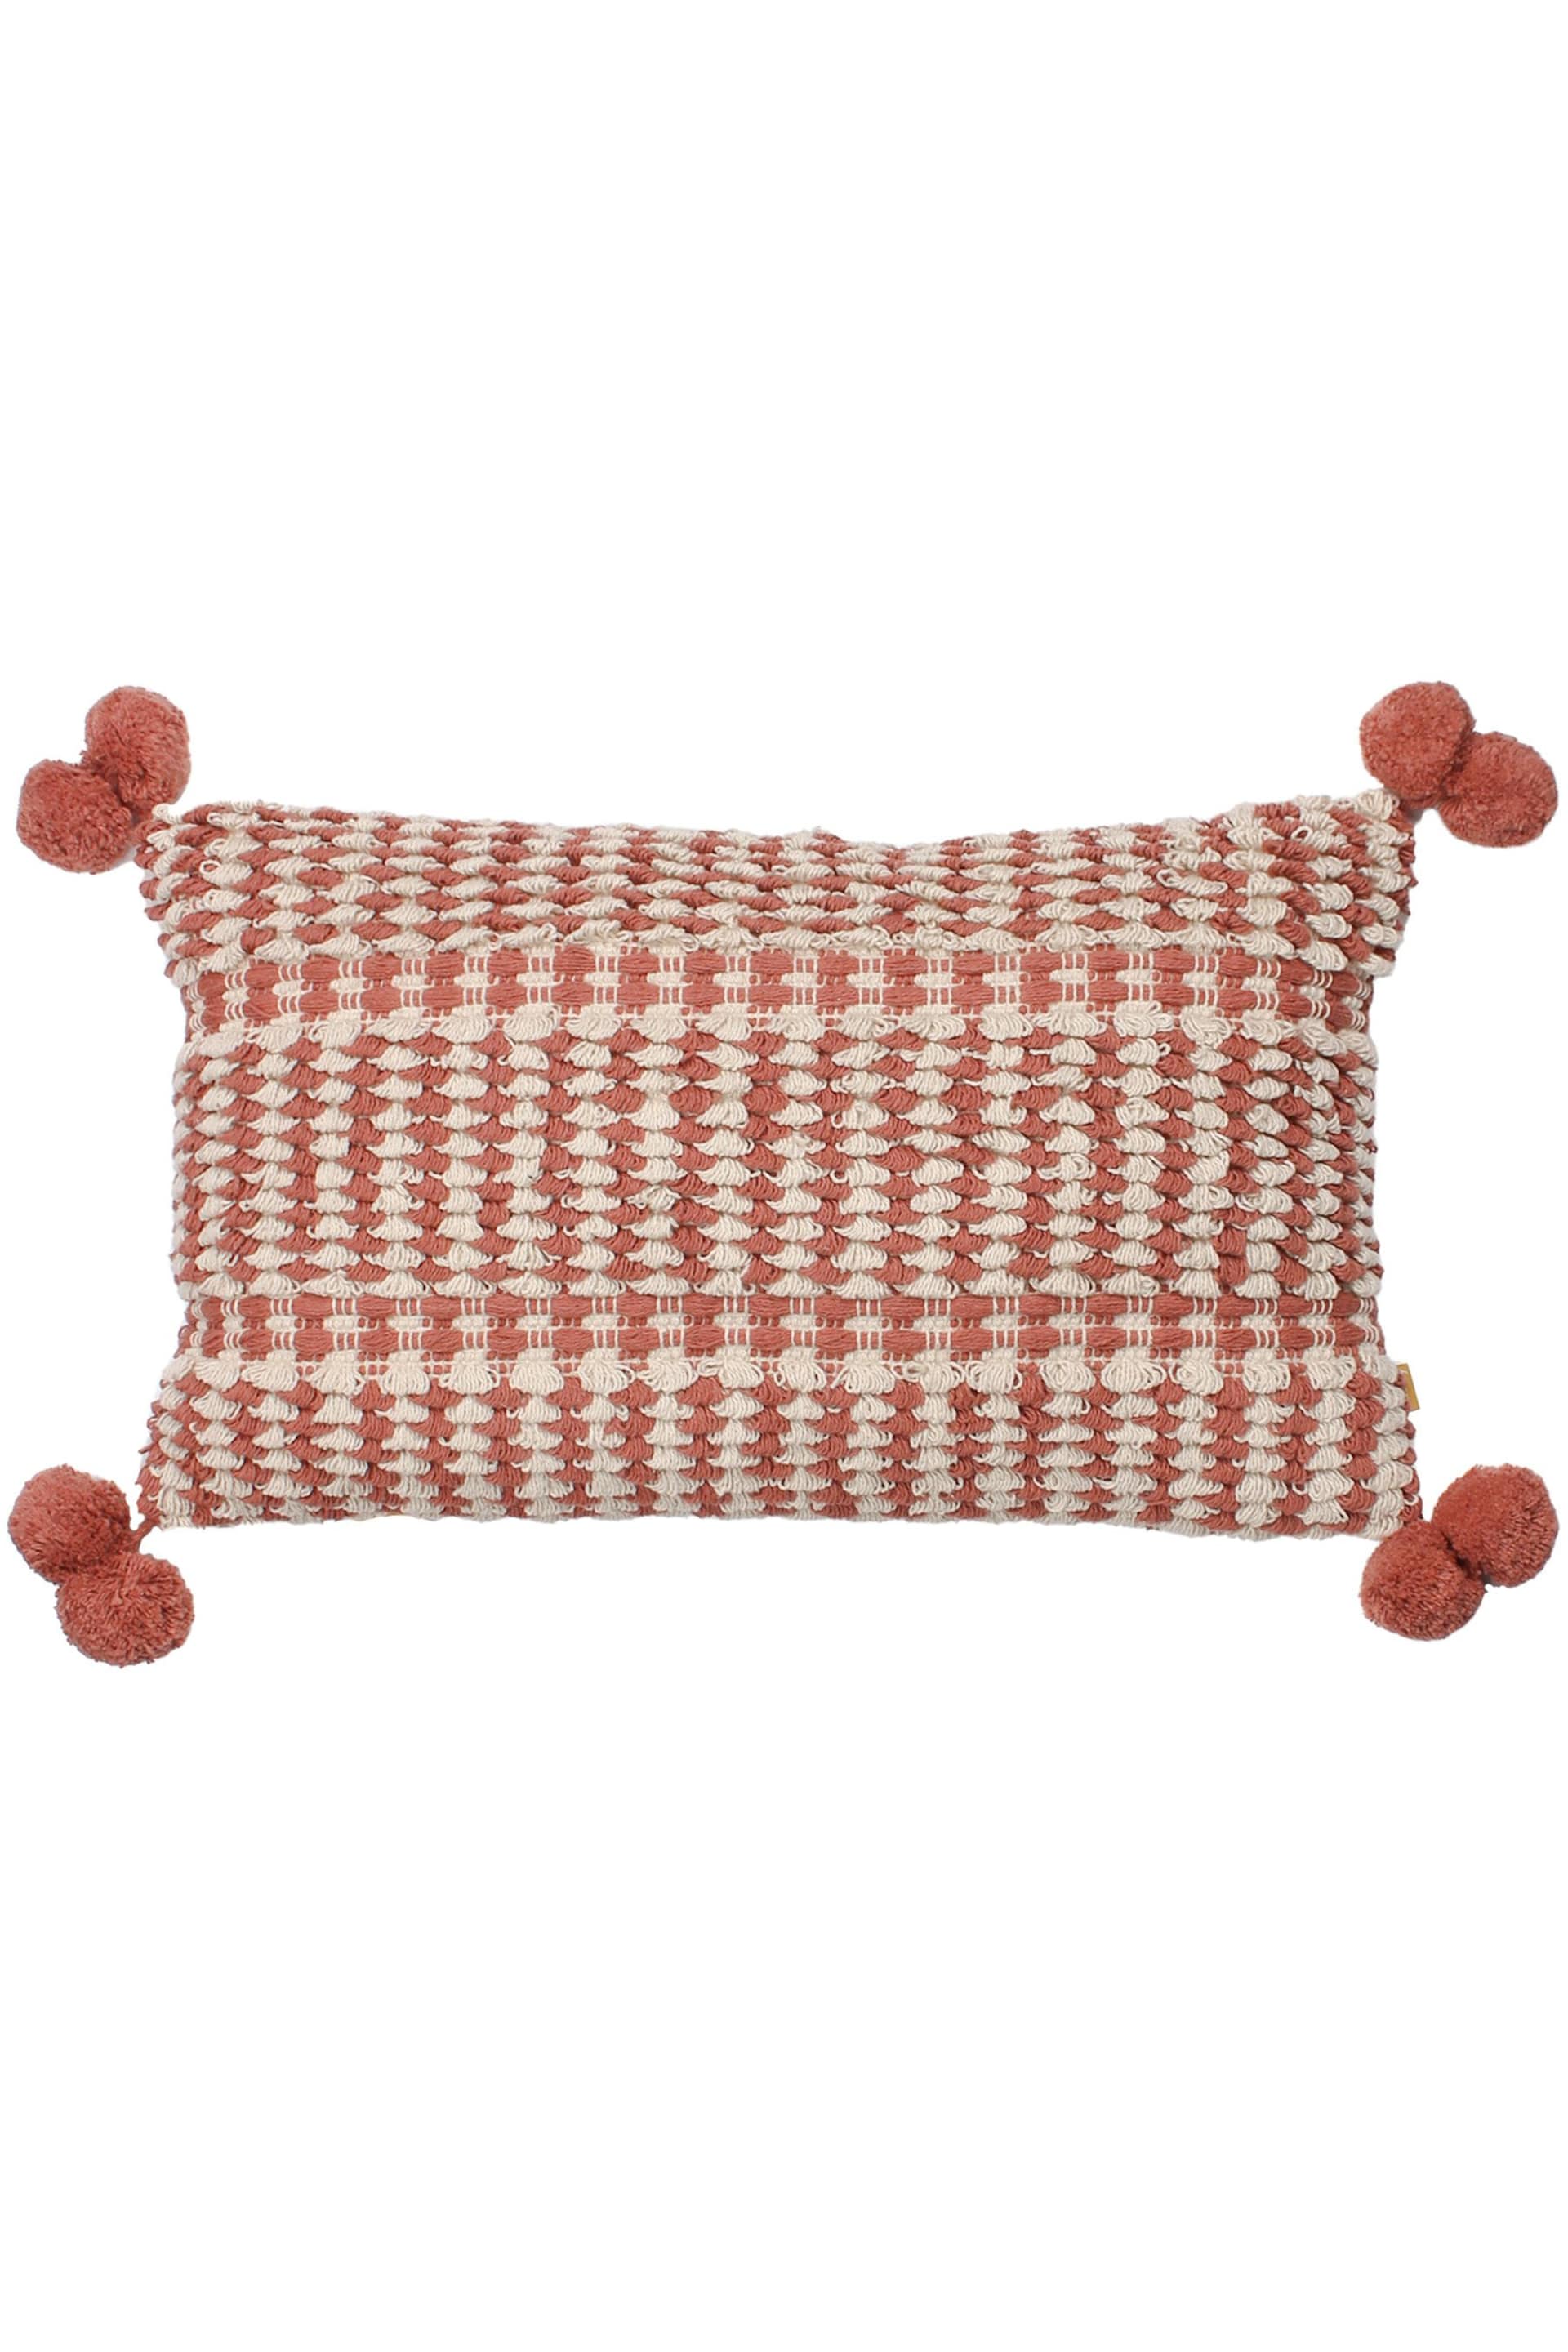 furn. Red Ayaan Woven Loop Tufted Cotton Double Pom Pom Cushion - Image 3 of 6